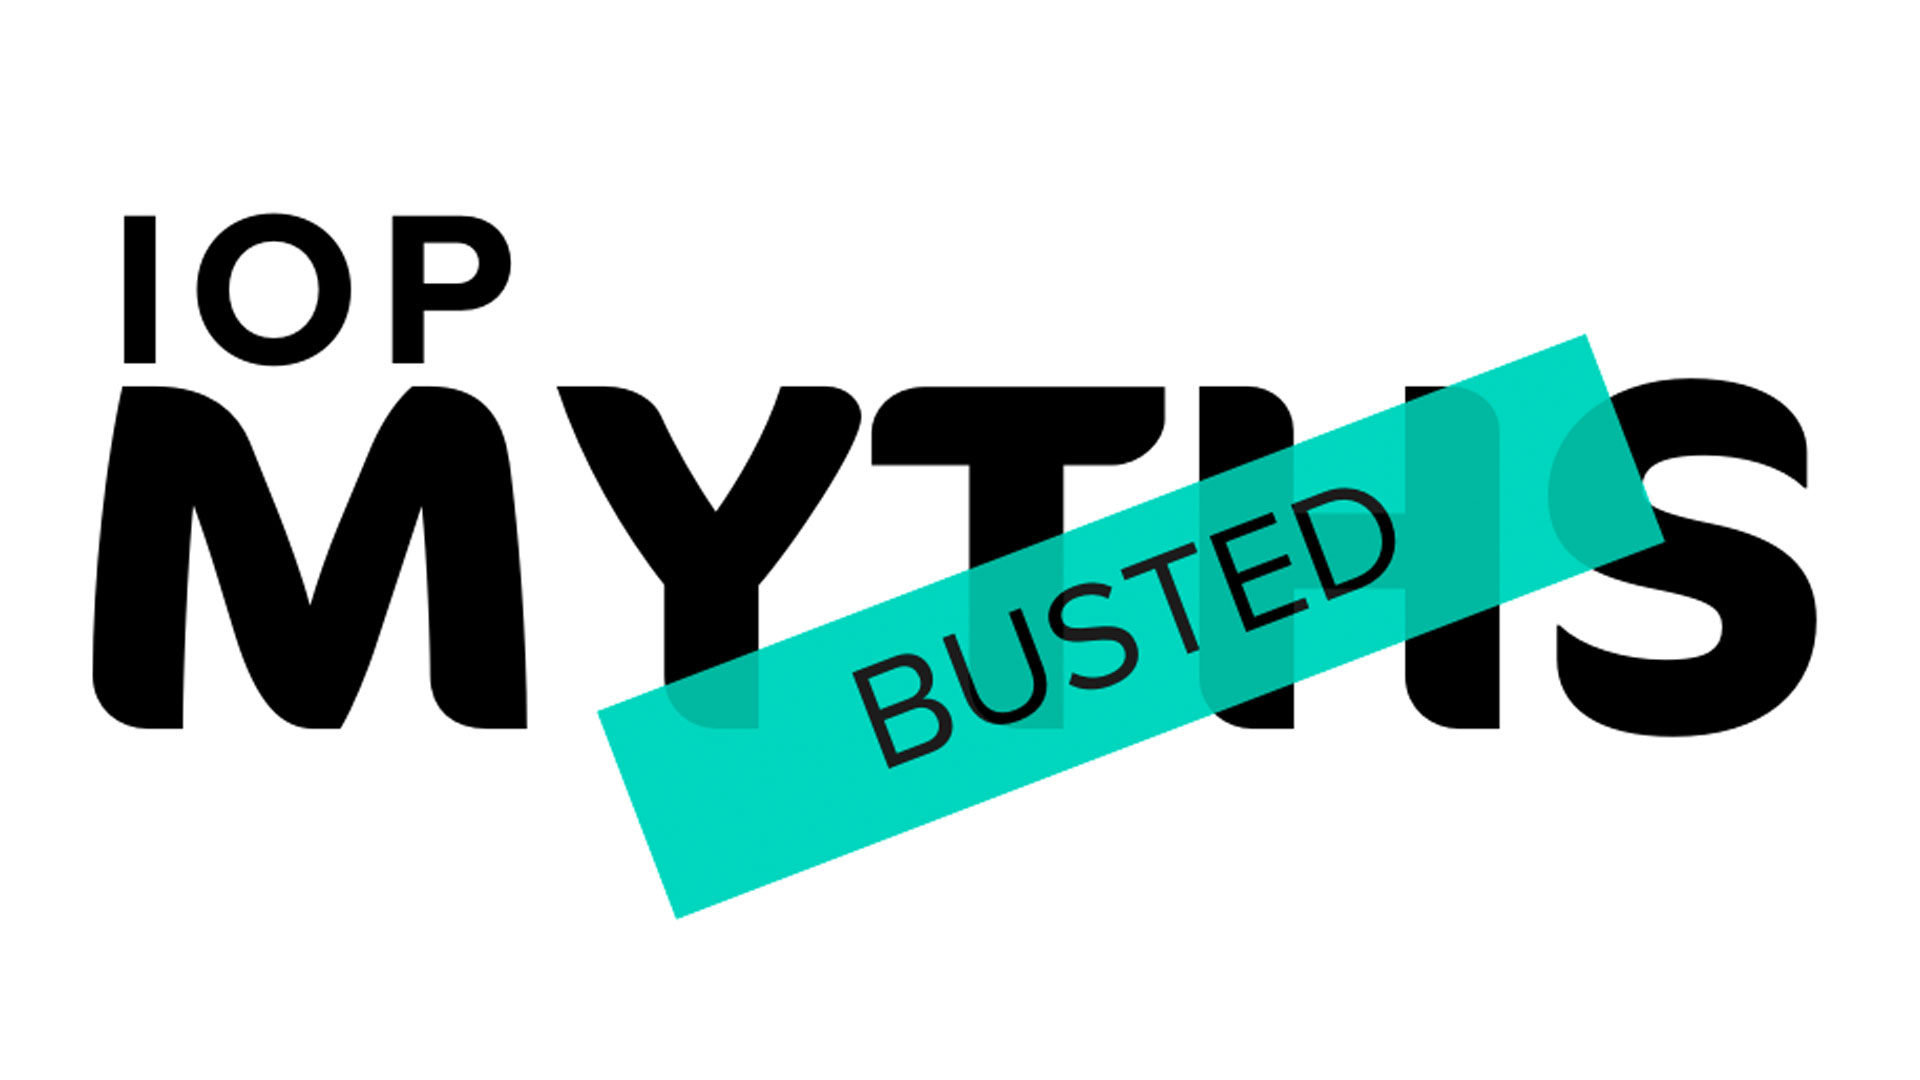 BUSTED! Setting the record straight on 5 major Interoperability myths